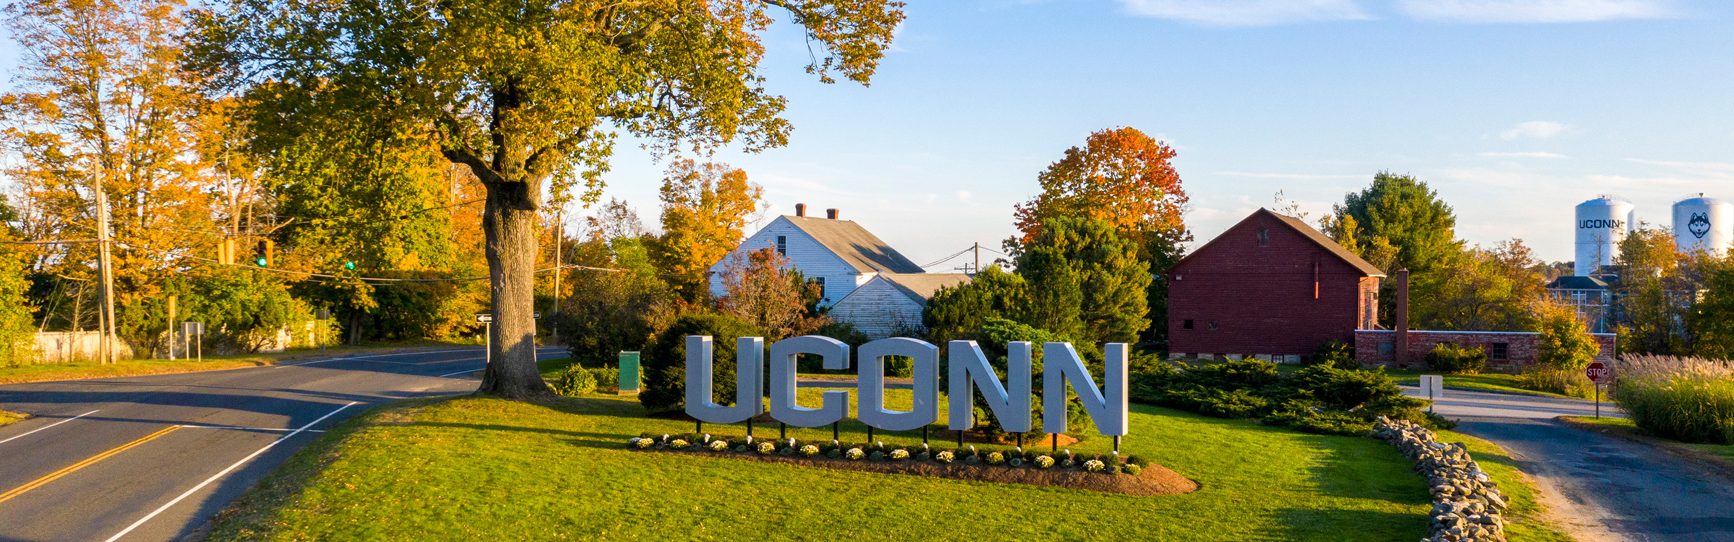 UCONN spelled out in large letters on green lawn.